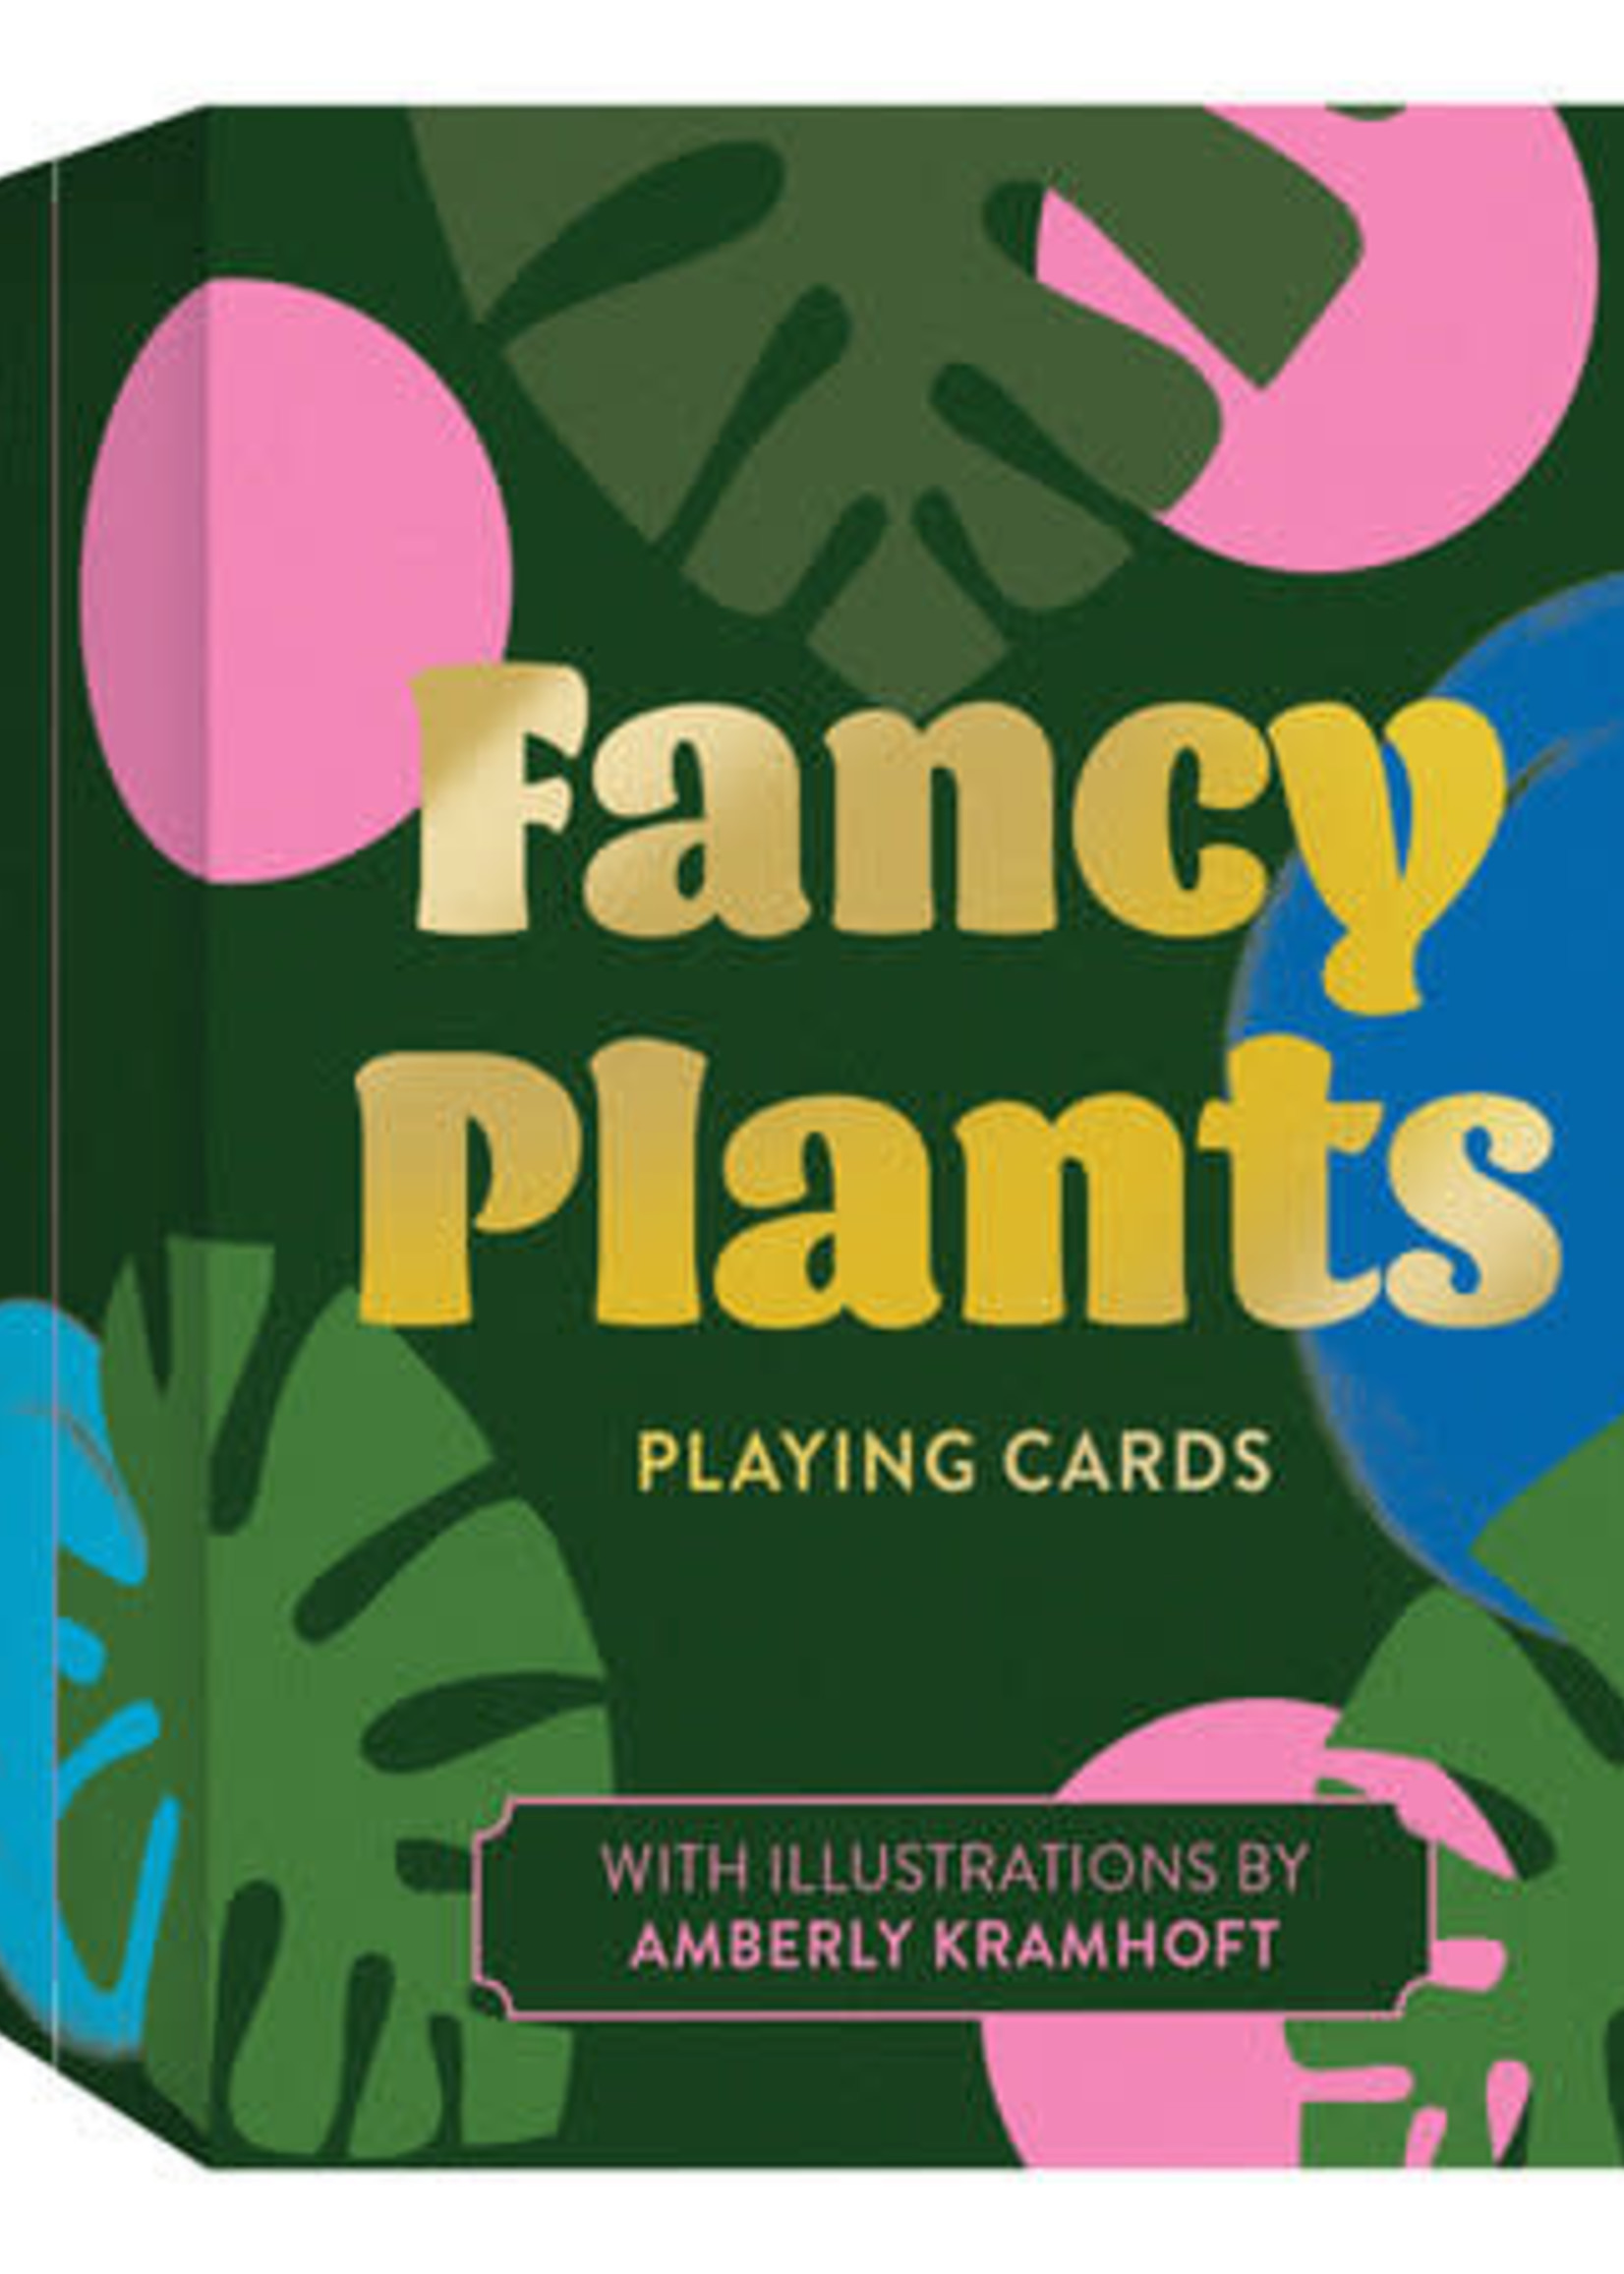 Fancy Plants Playing Cards by Amberly Kramhoft